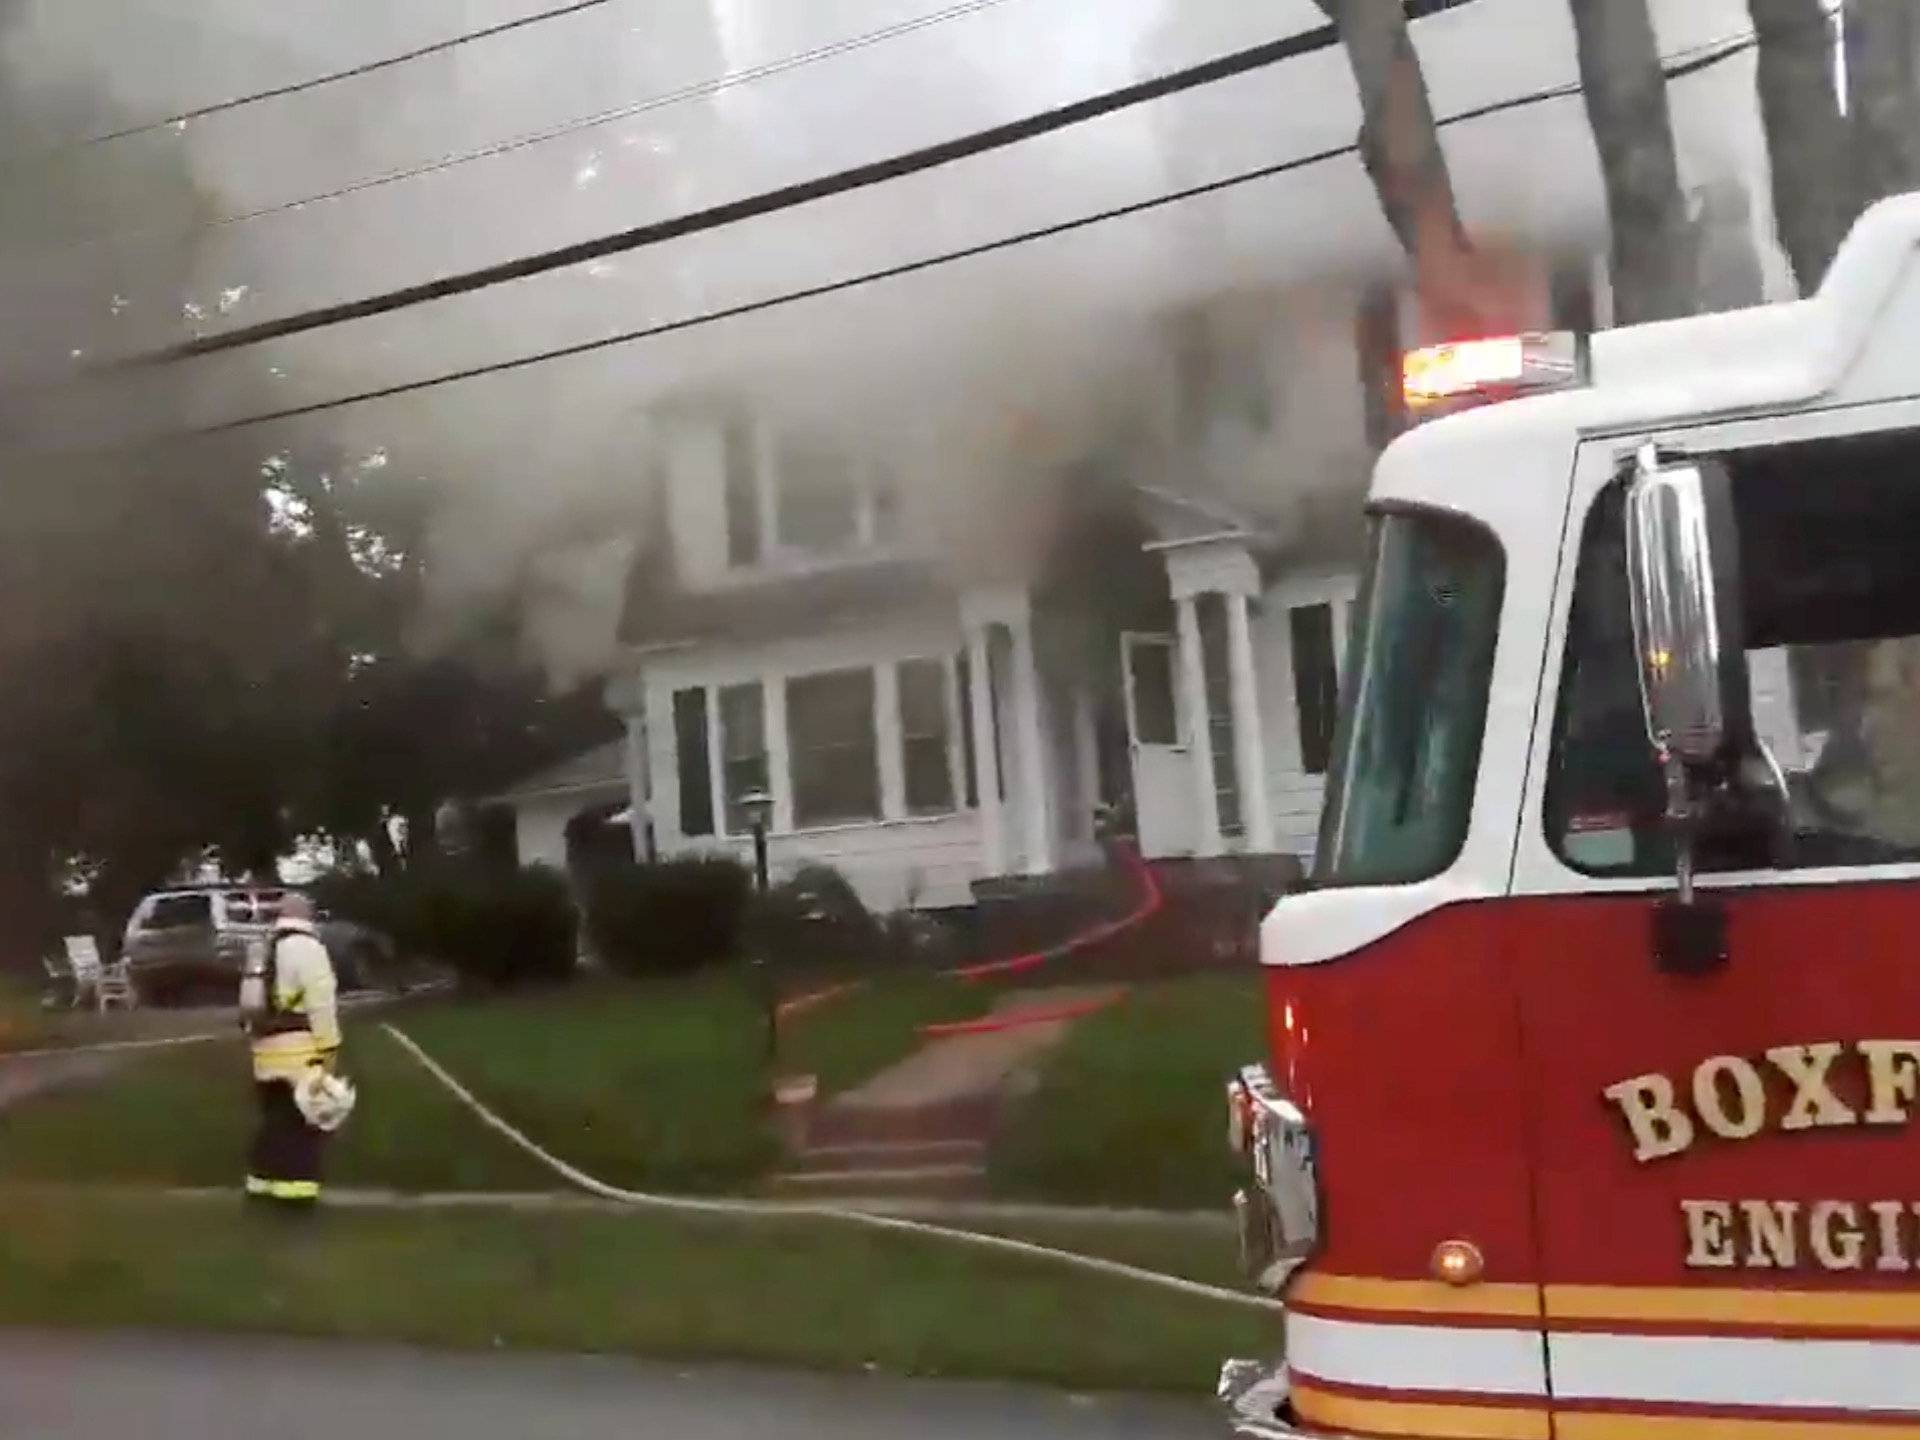 Still image from social media video footage by Boston Sparks shows firefighters working near a building emitting smoke after explosions in North Andover, Massachusetts